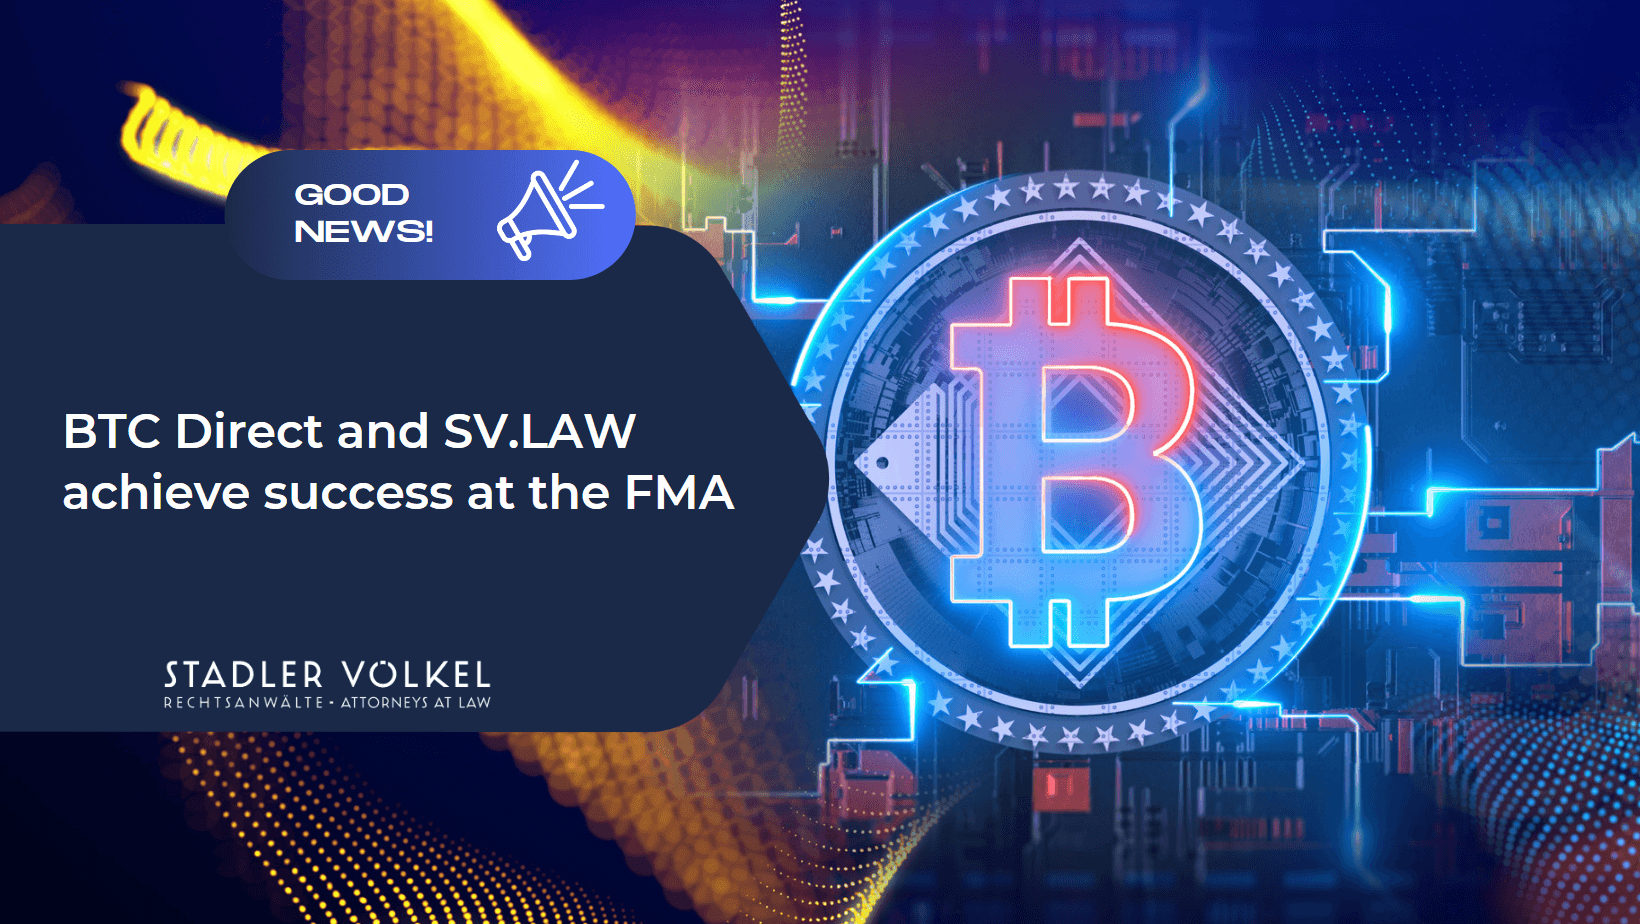 BTC Direct and SV.LAW achieve success at the FMA